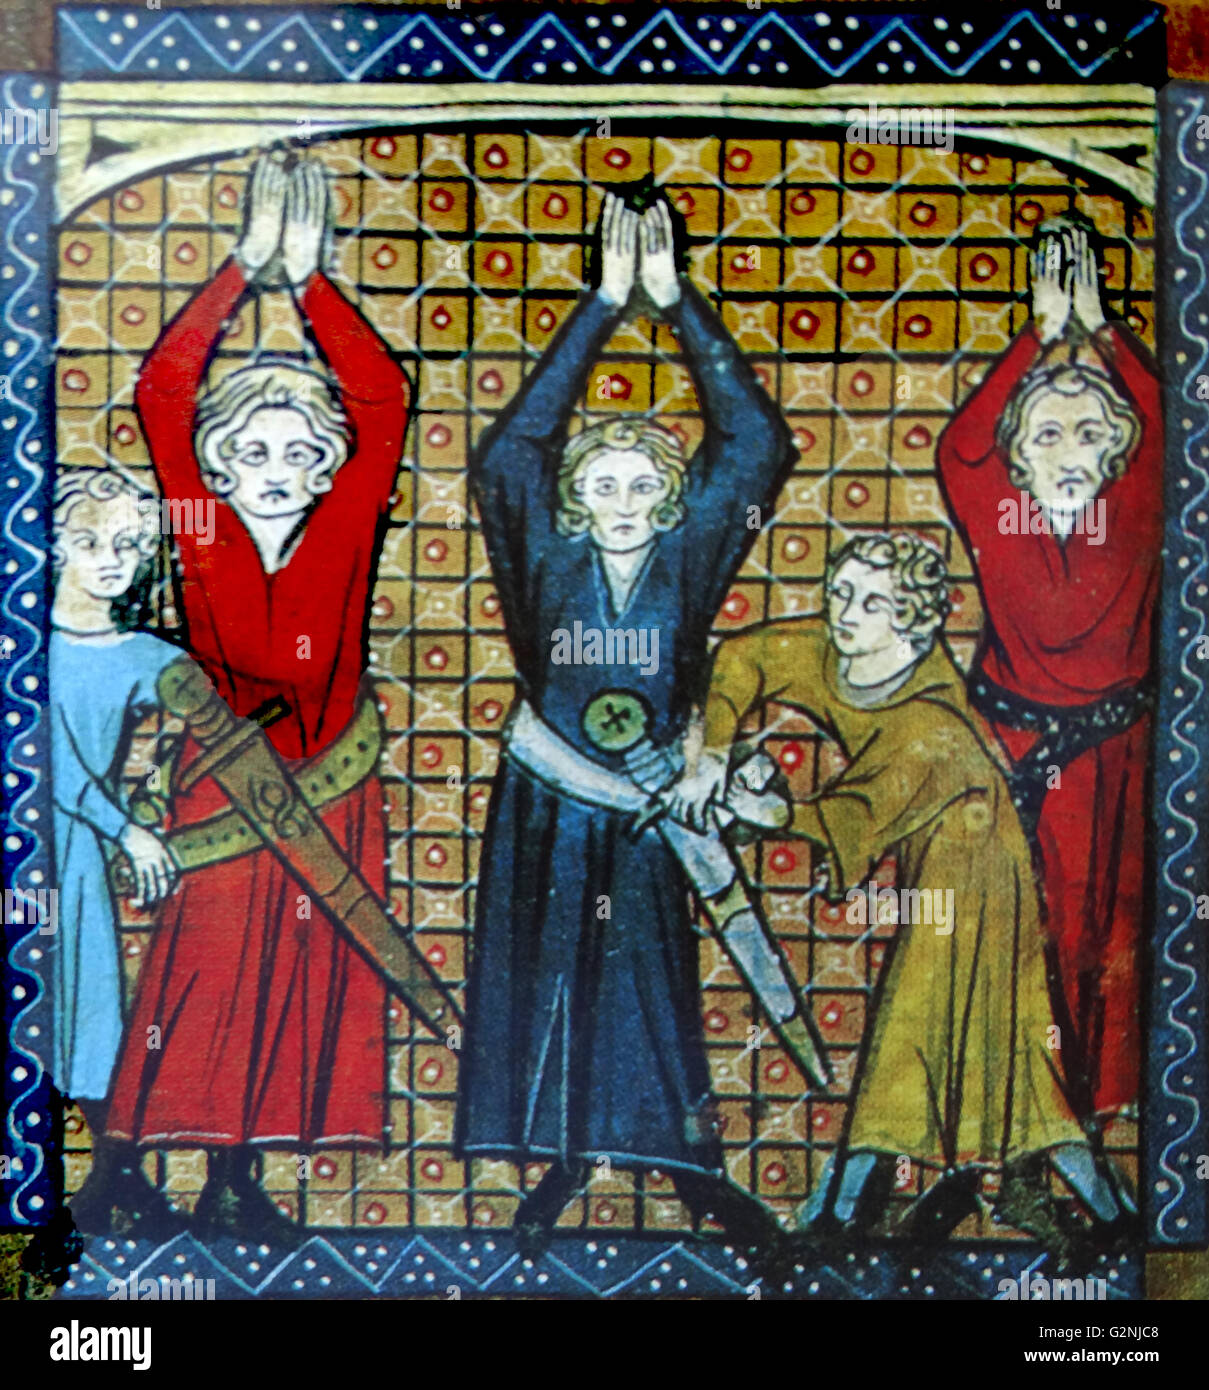 Illumination titled 'Coment Viviens fu fais che', from the manuscript of the Chansons concerning King Guillaume d'Orange. The illumination depicts squires removing the swords from The king and knights. Dated 14th Century Stock Photo